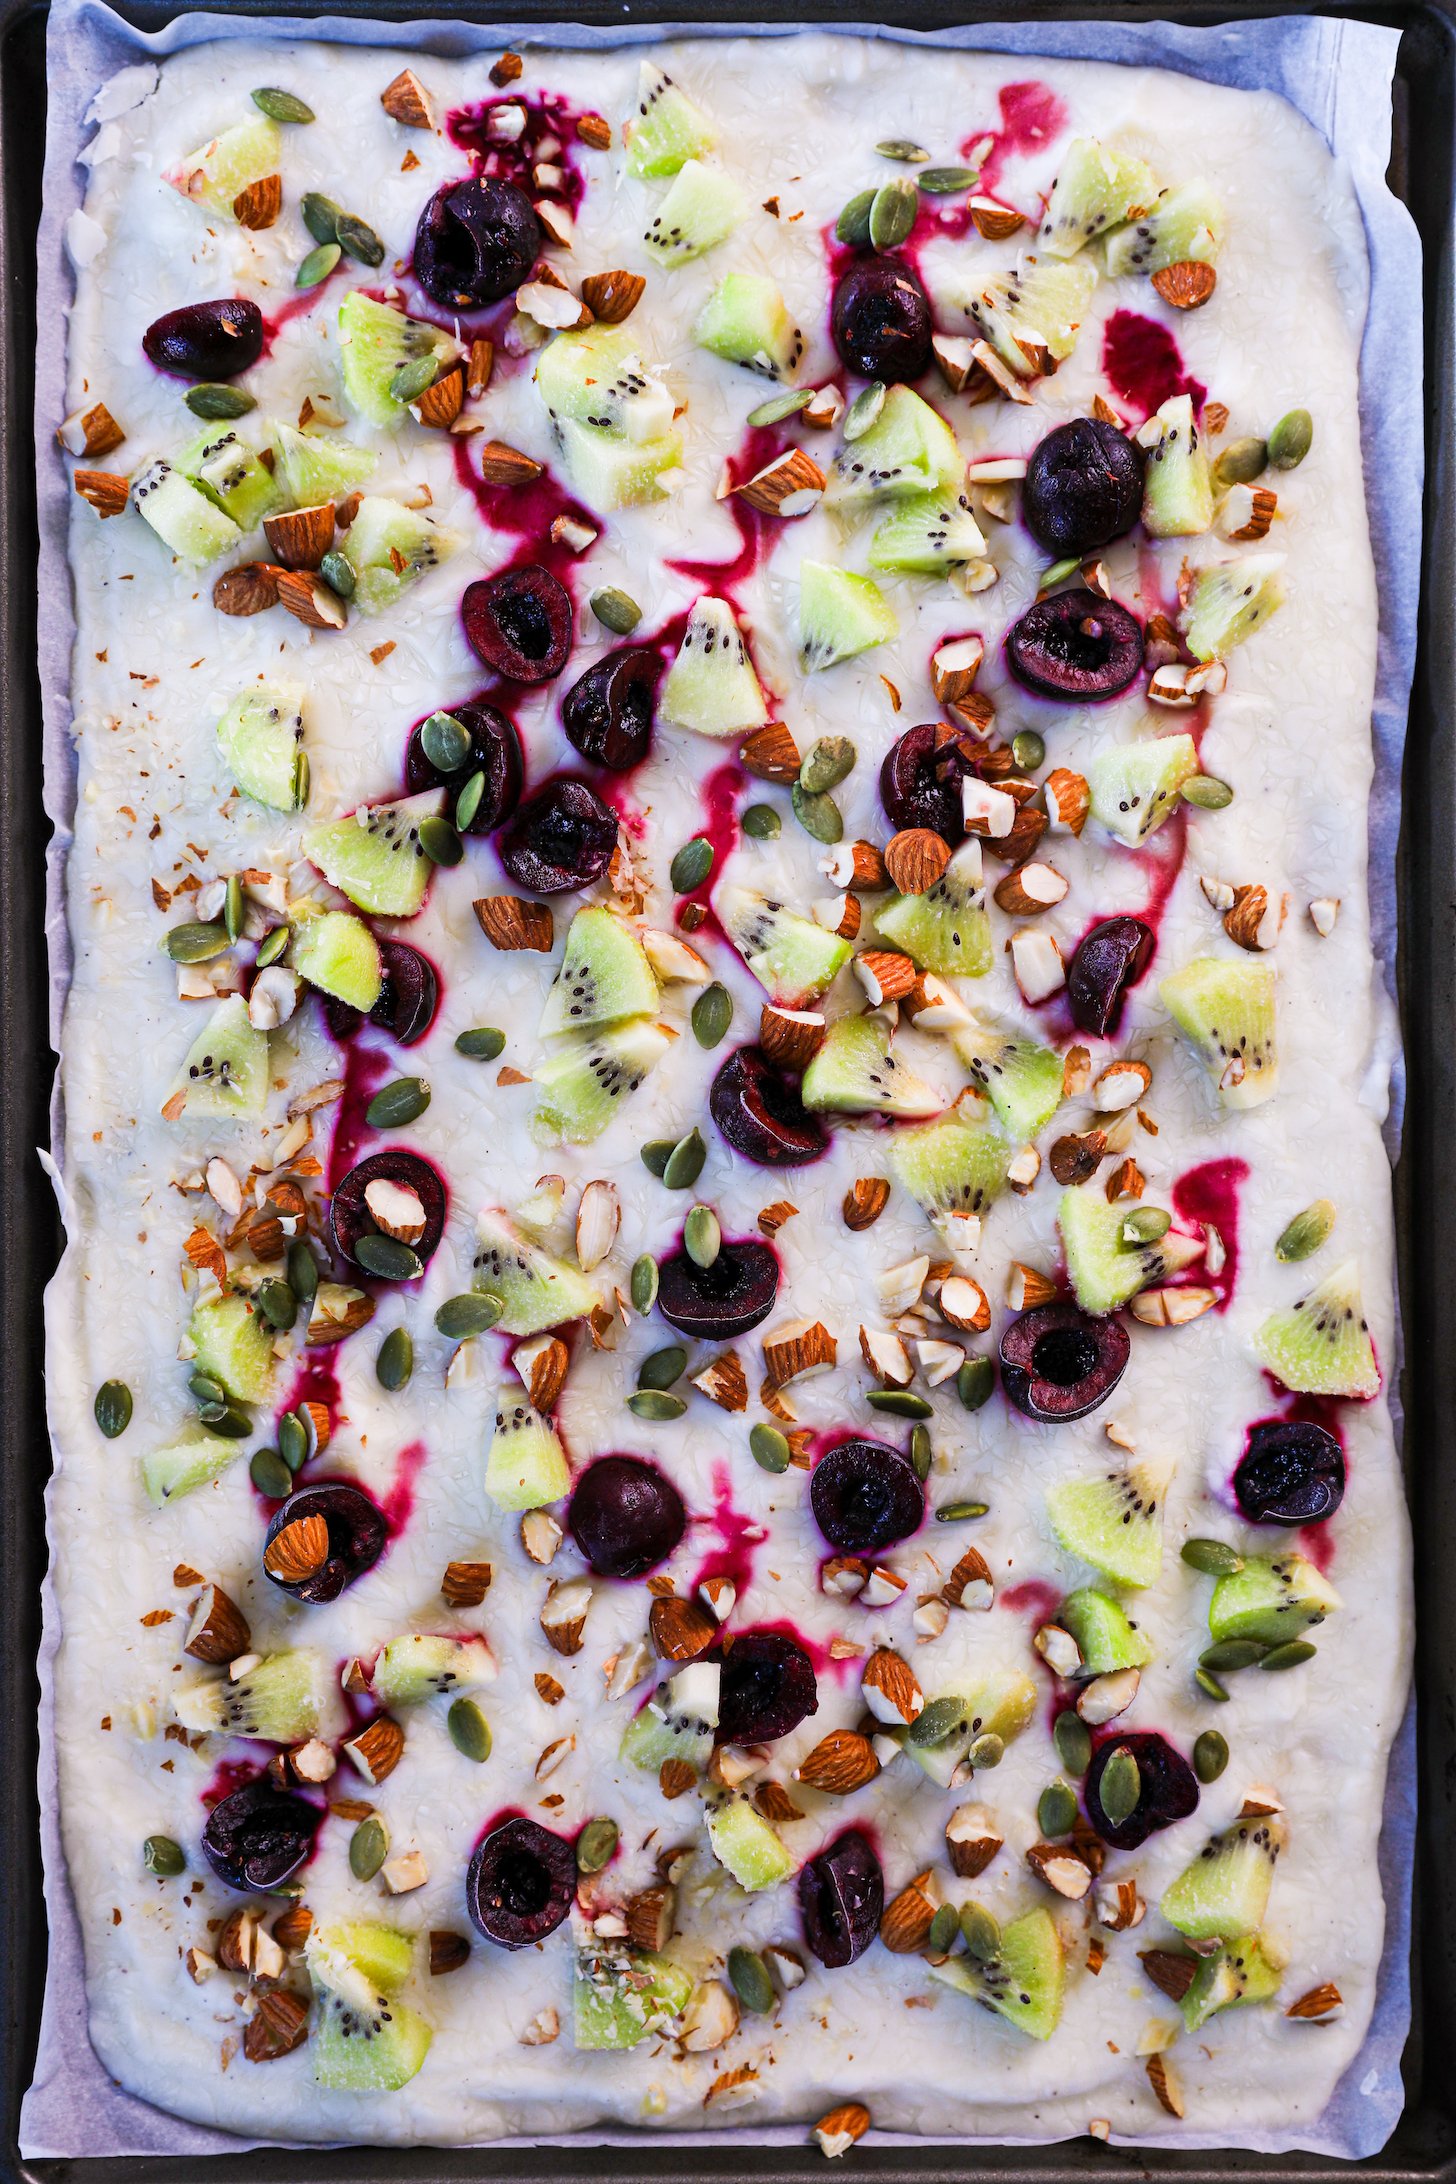 A smooth layer of frozen yogurt garnished with a variety of diced fruits and nuts, showcased on a tray with raised edges and parchment paper lining.